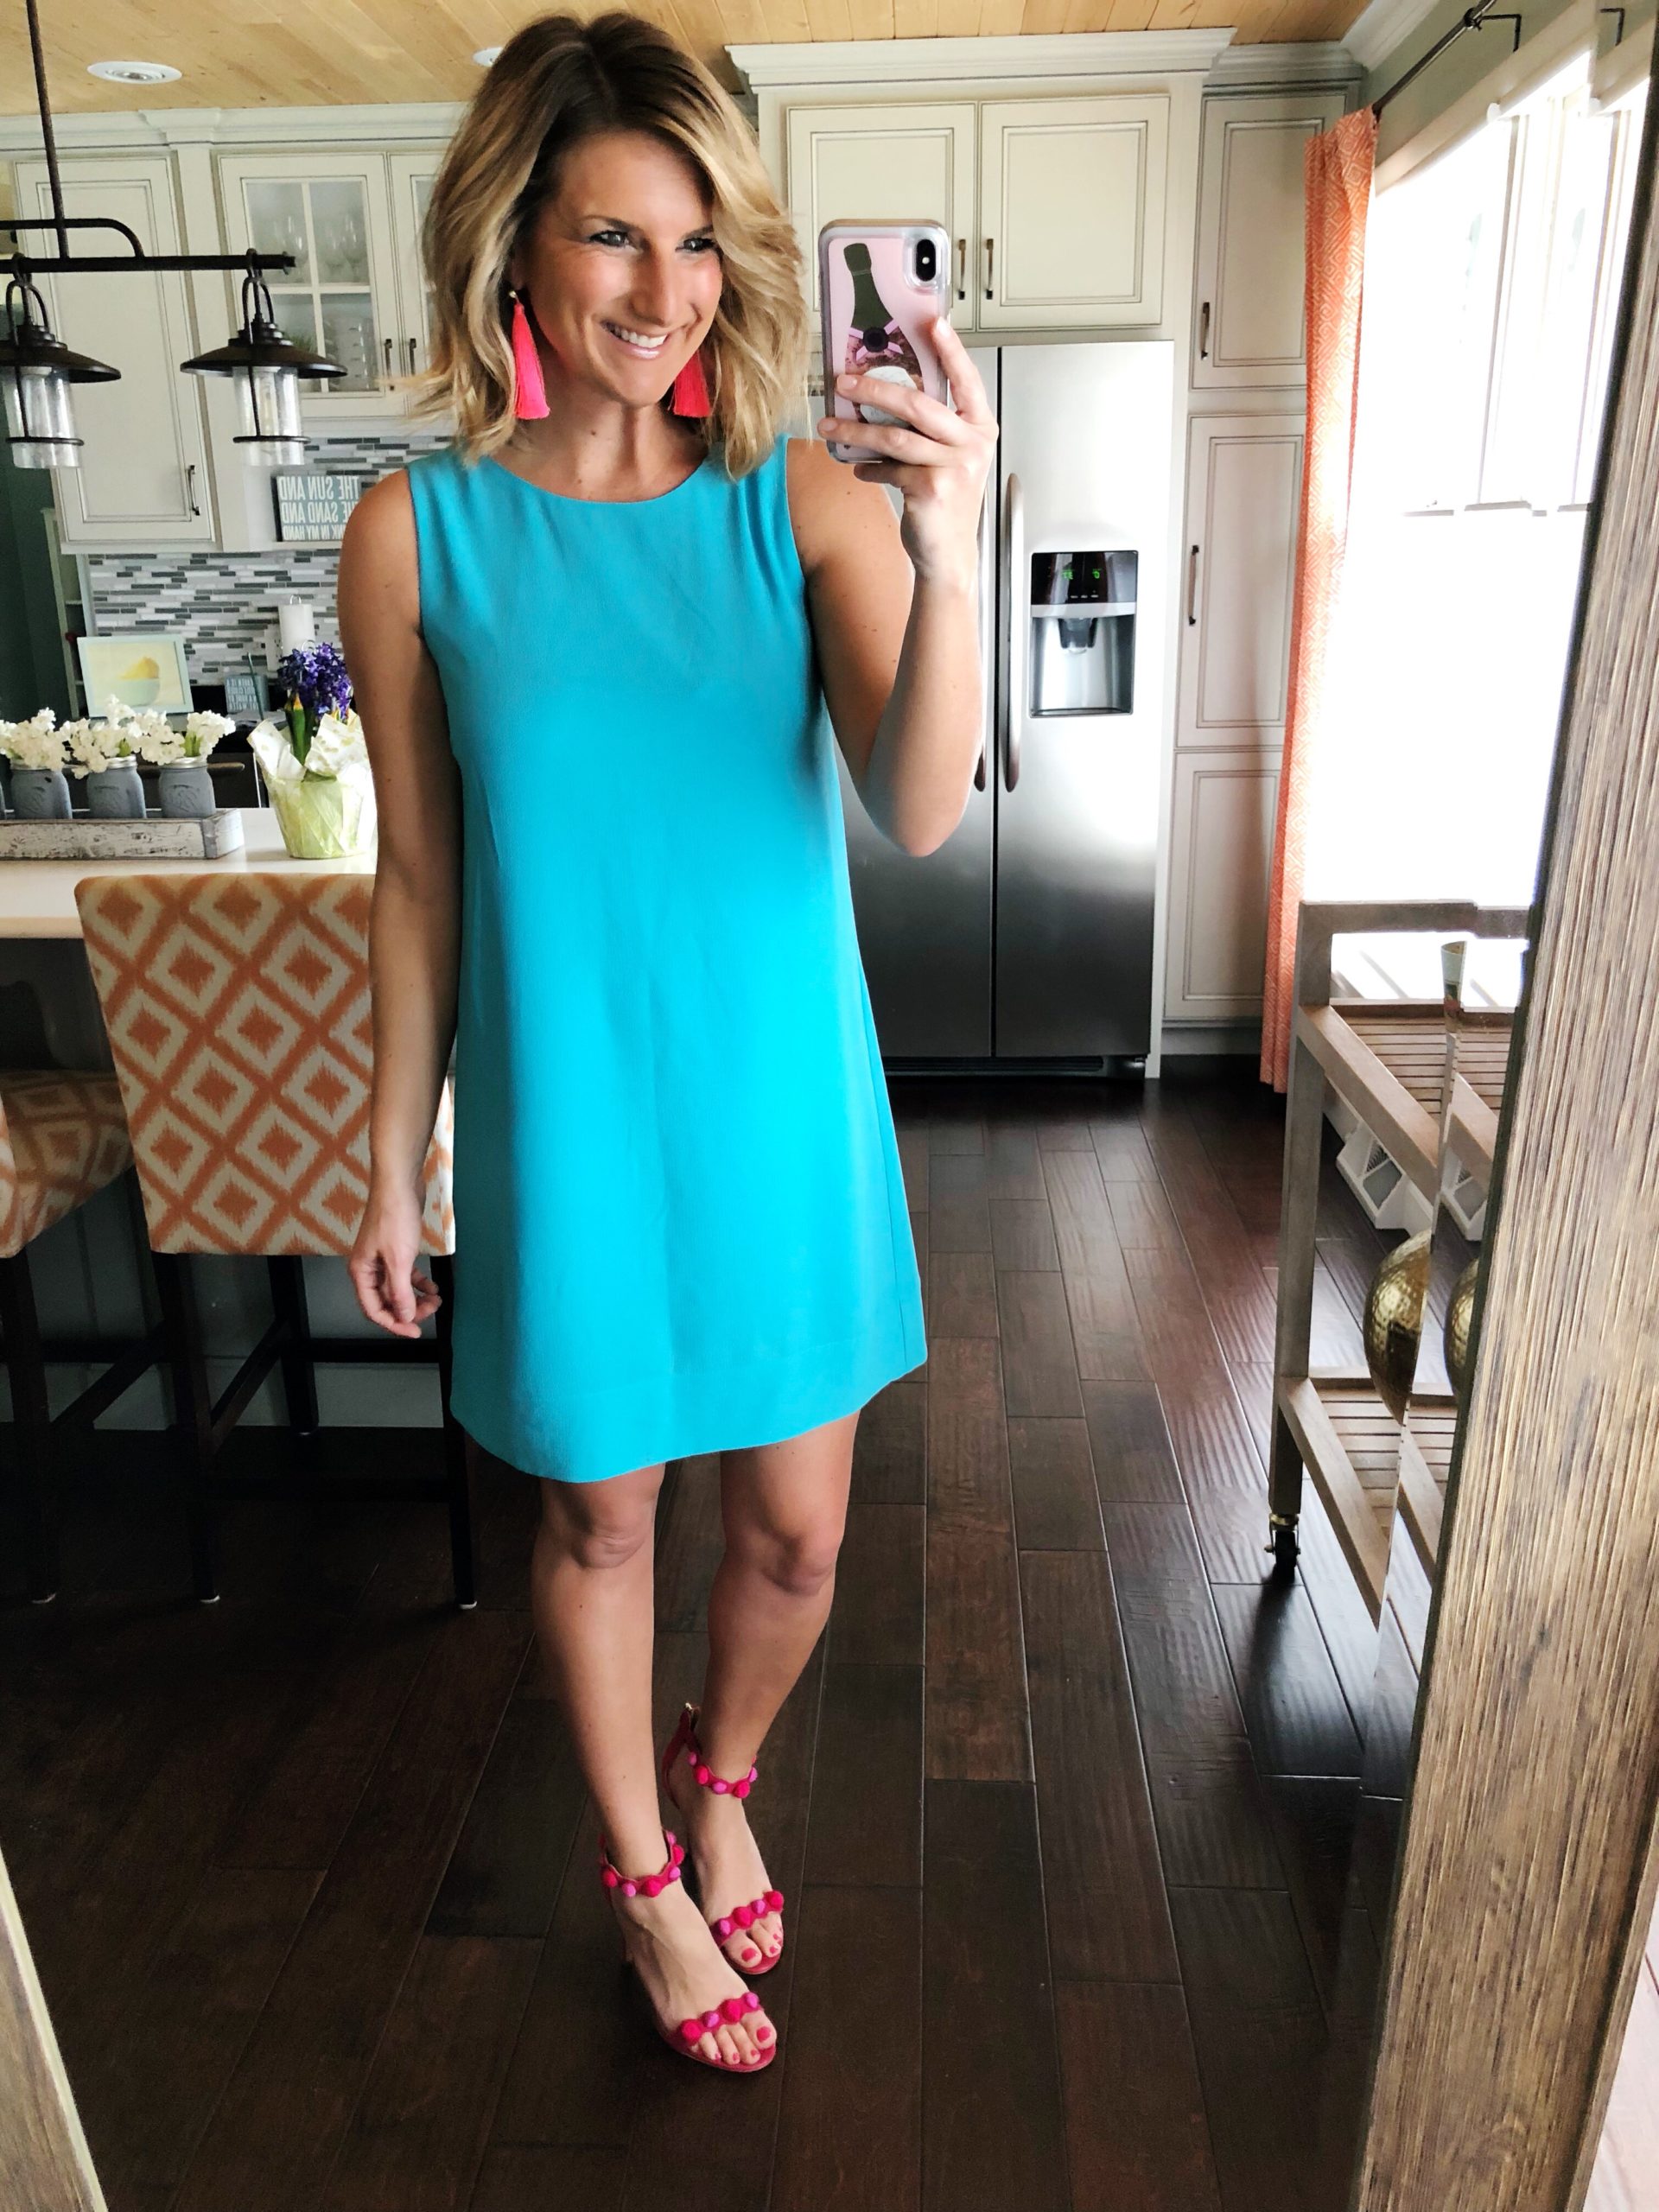 Perfect Summer Dress // Shift Dress + Strappy Sandals + Statement Earrings